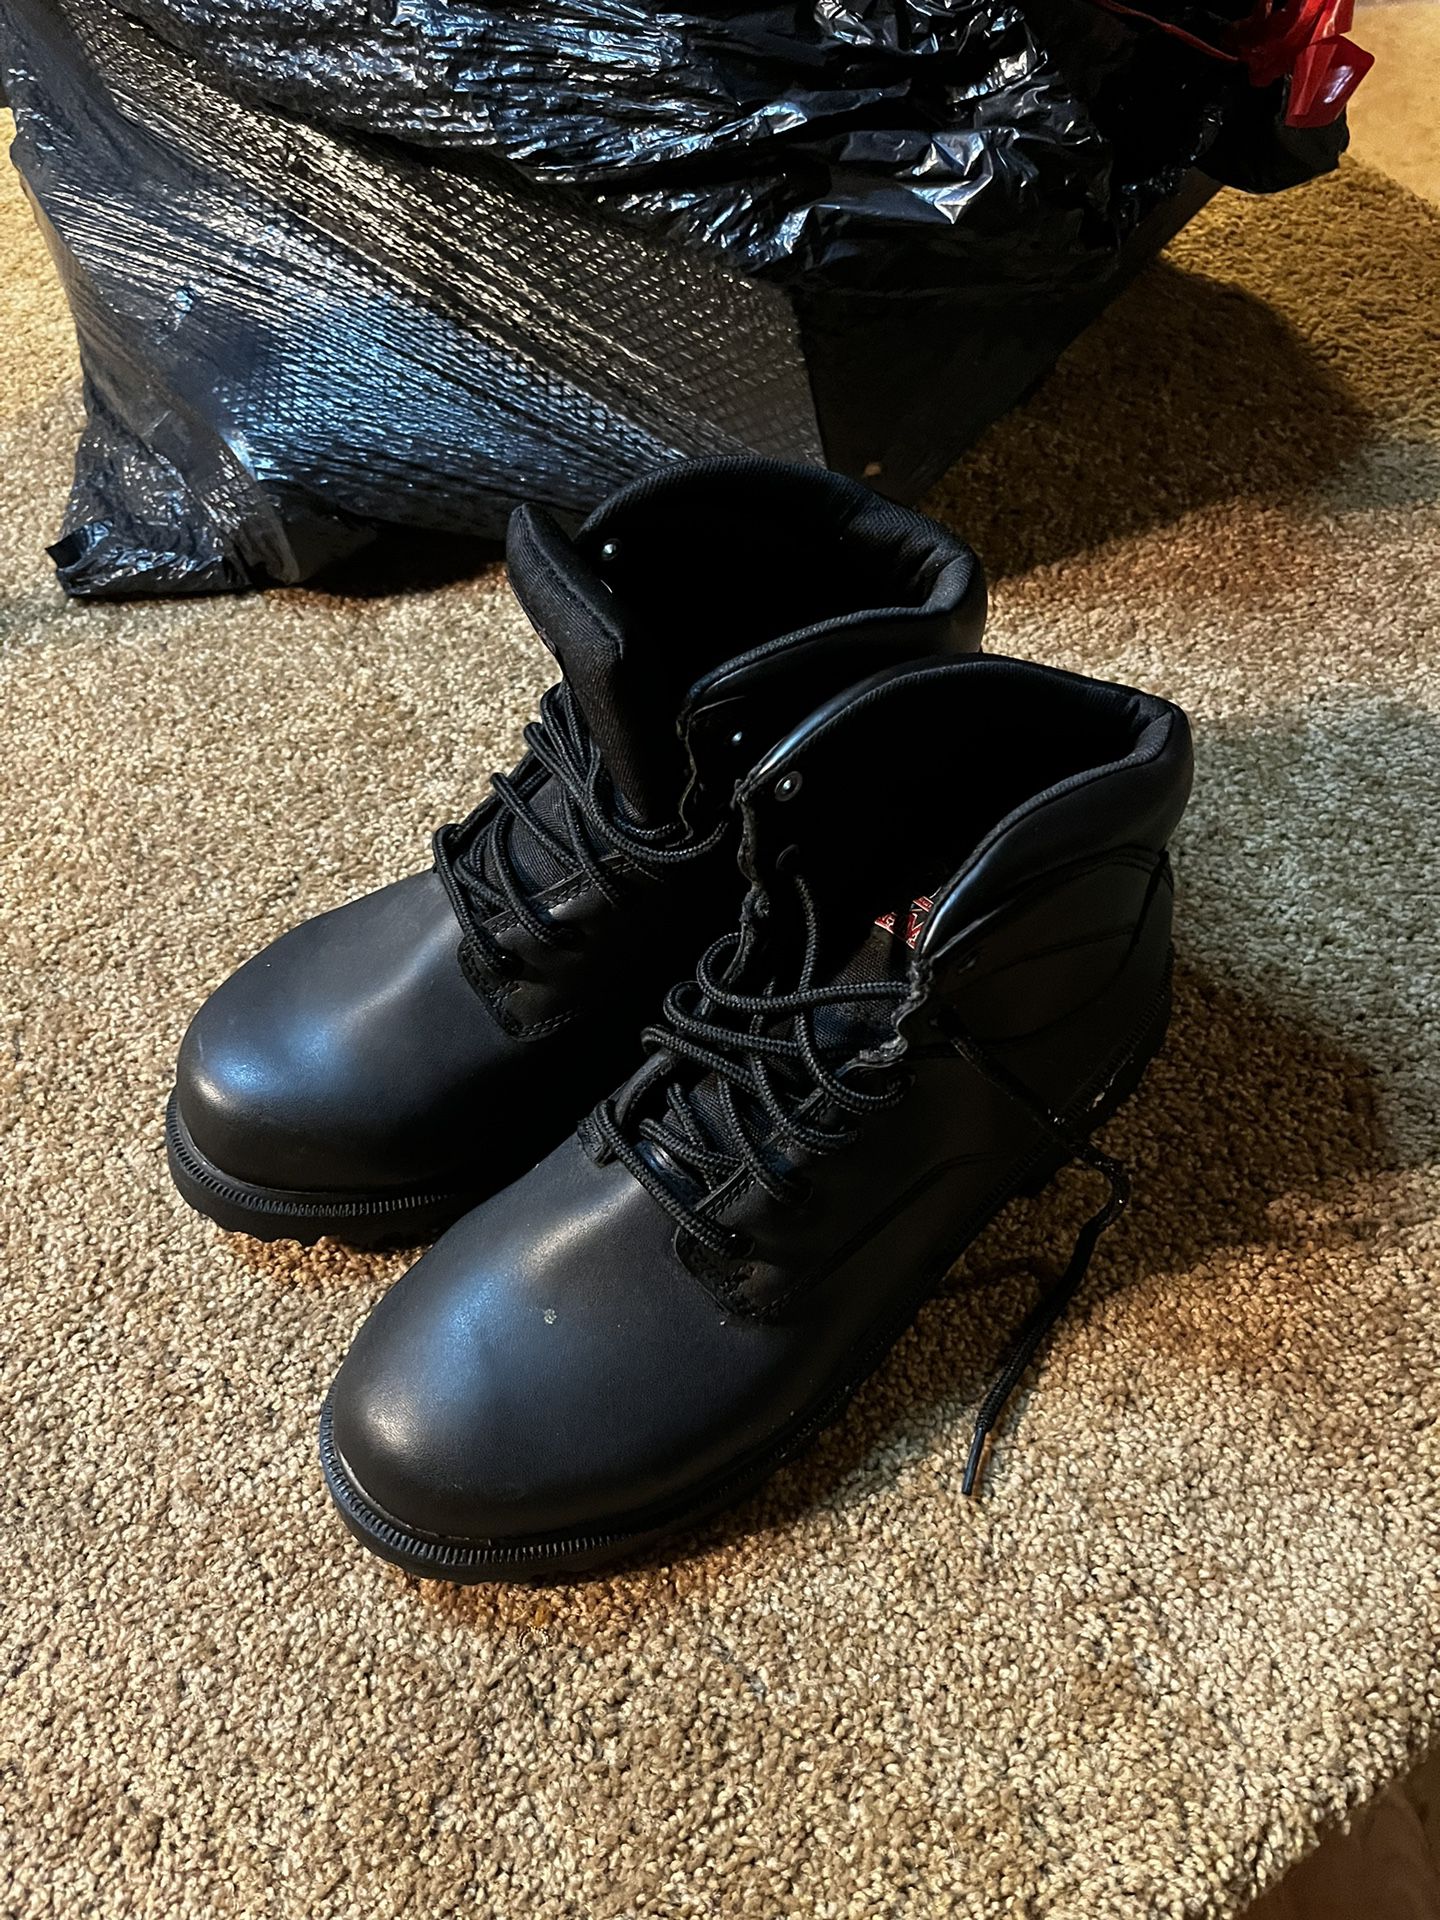 Work Boots Size 13 Black